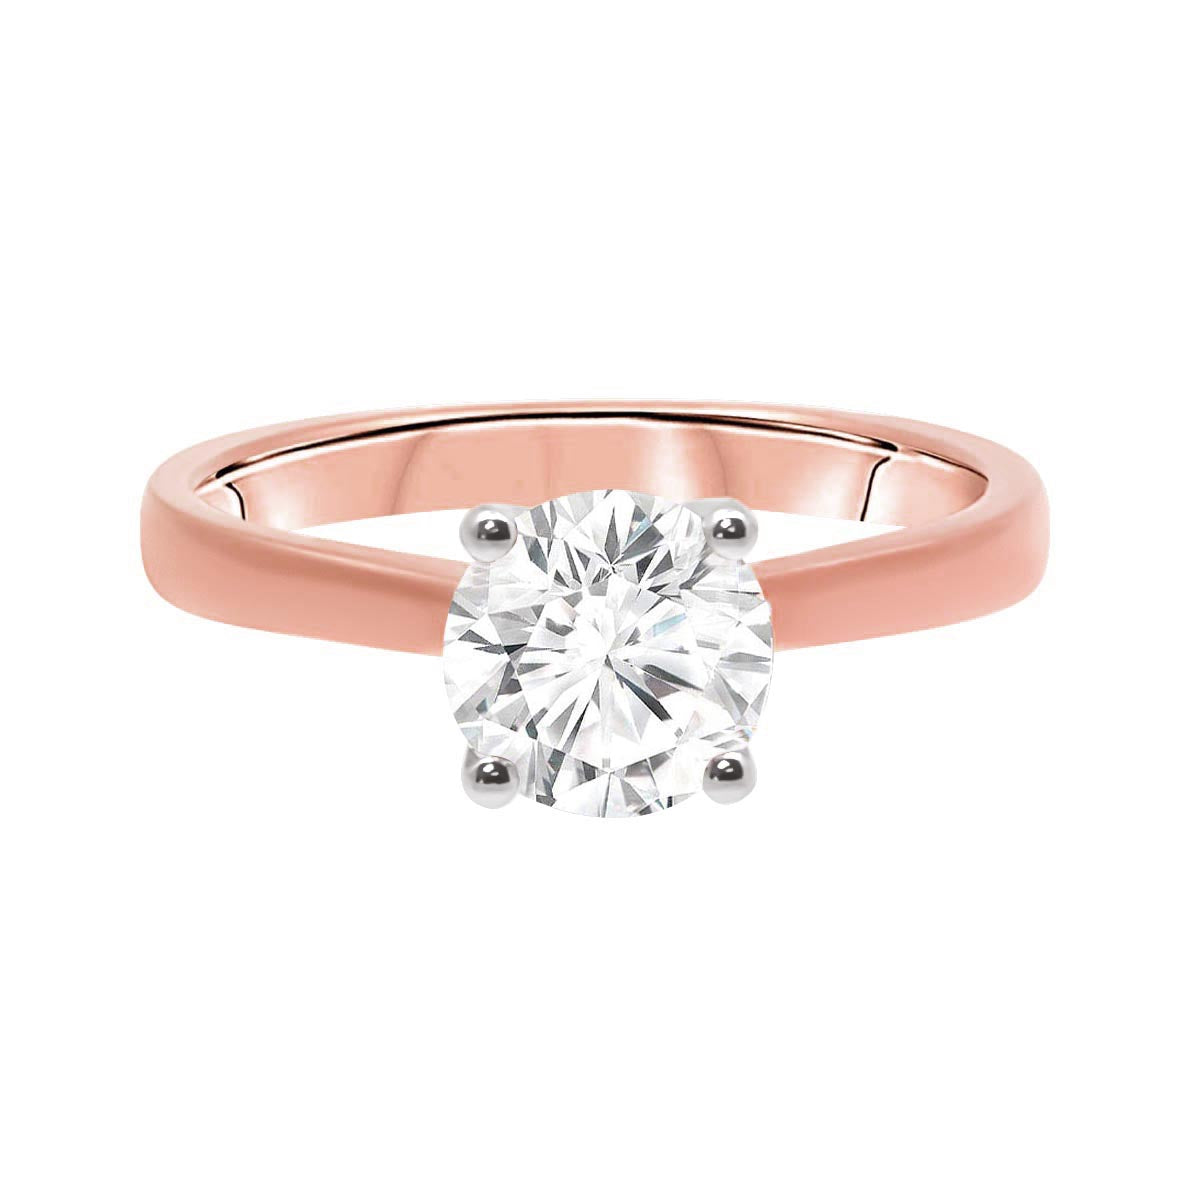 Tulip Setting Solitaire Engagement Ring In Rose Gold Gold Lying flat